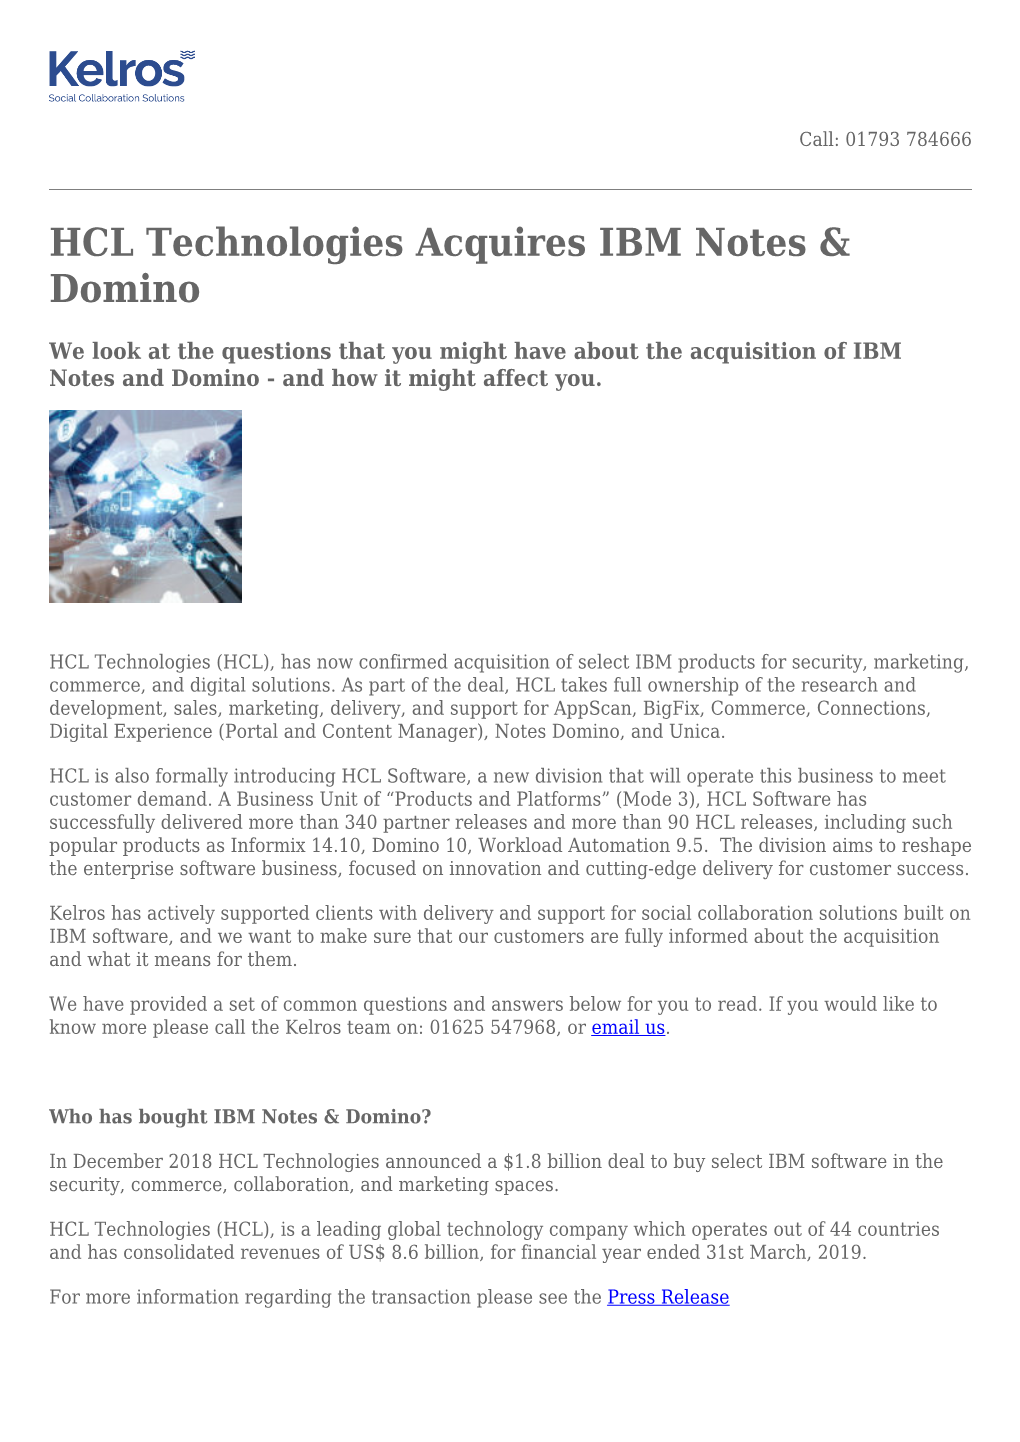 HCL Technologies Acquires IBM Notes & Domino